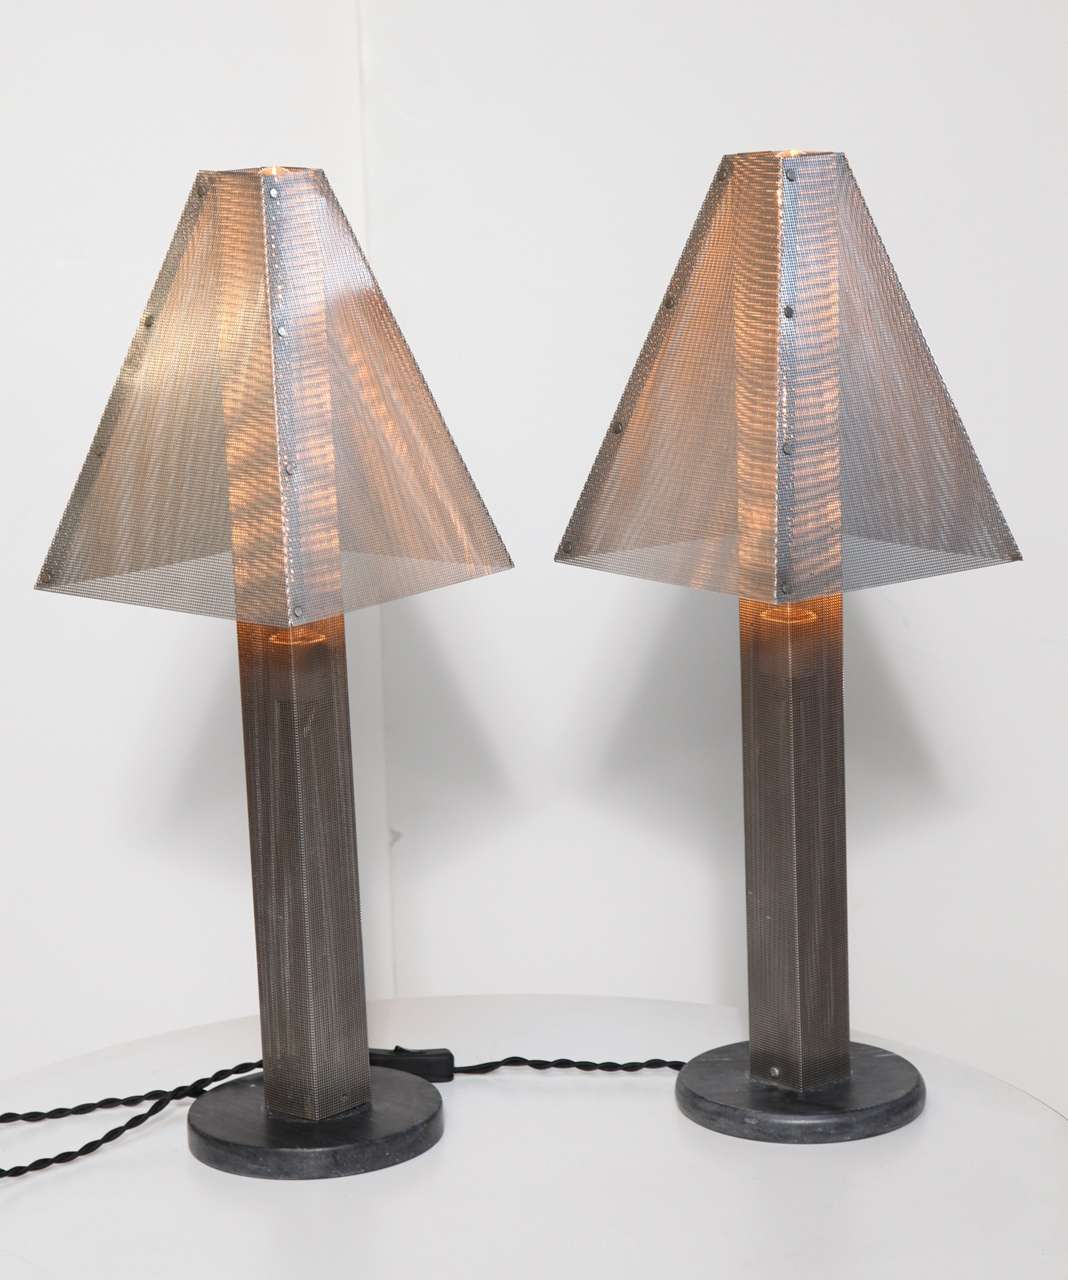 Pair of Post Modern Mesh and Marble Table Lamps by handbag designer, Wendy Stevens. Featuring a rectilinear fine Steel Wire mesh column and Shades, on round Dark Gray Marble bases. Architectural. Neutral. Statement lighting. Casts a beautiful warm